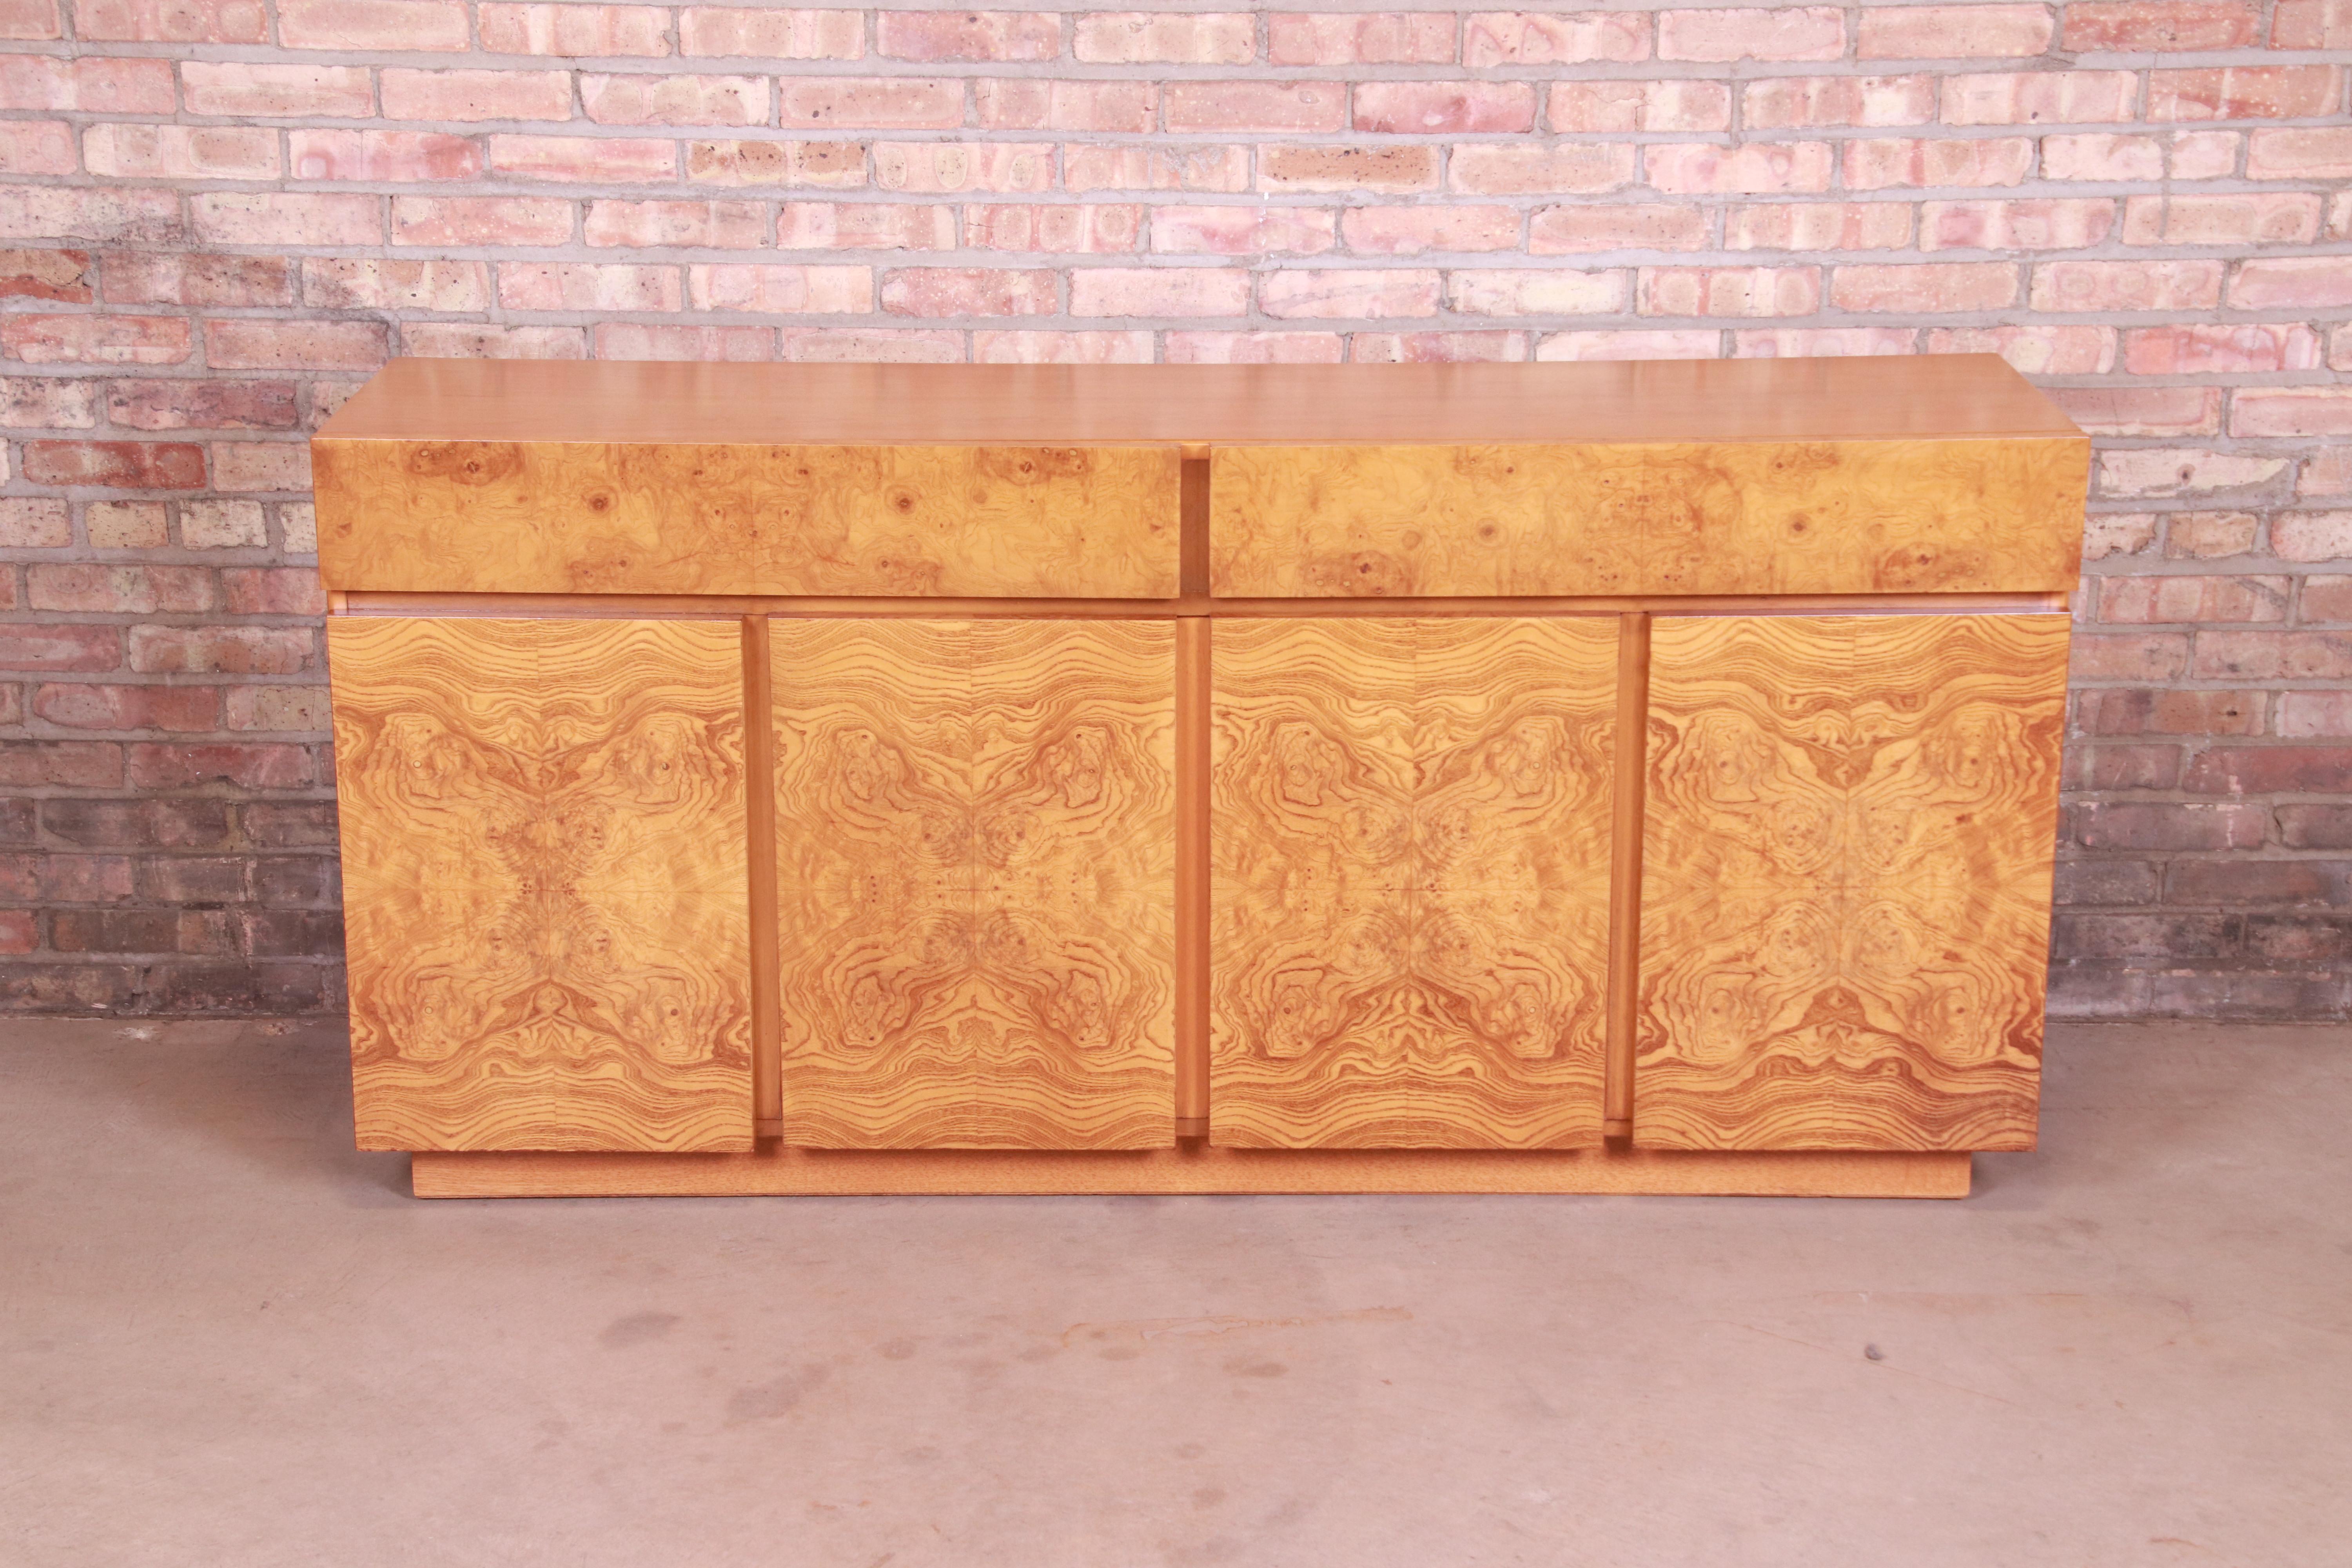 American Milo Baughman Style Burl Wood Sideboard Credenza by Lane, Newly Refinished